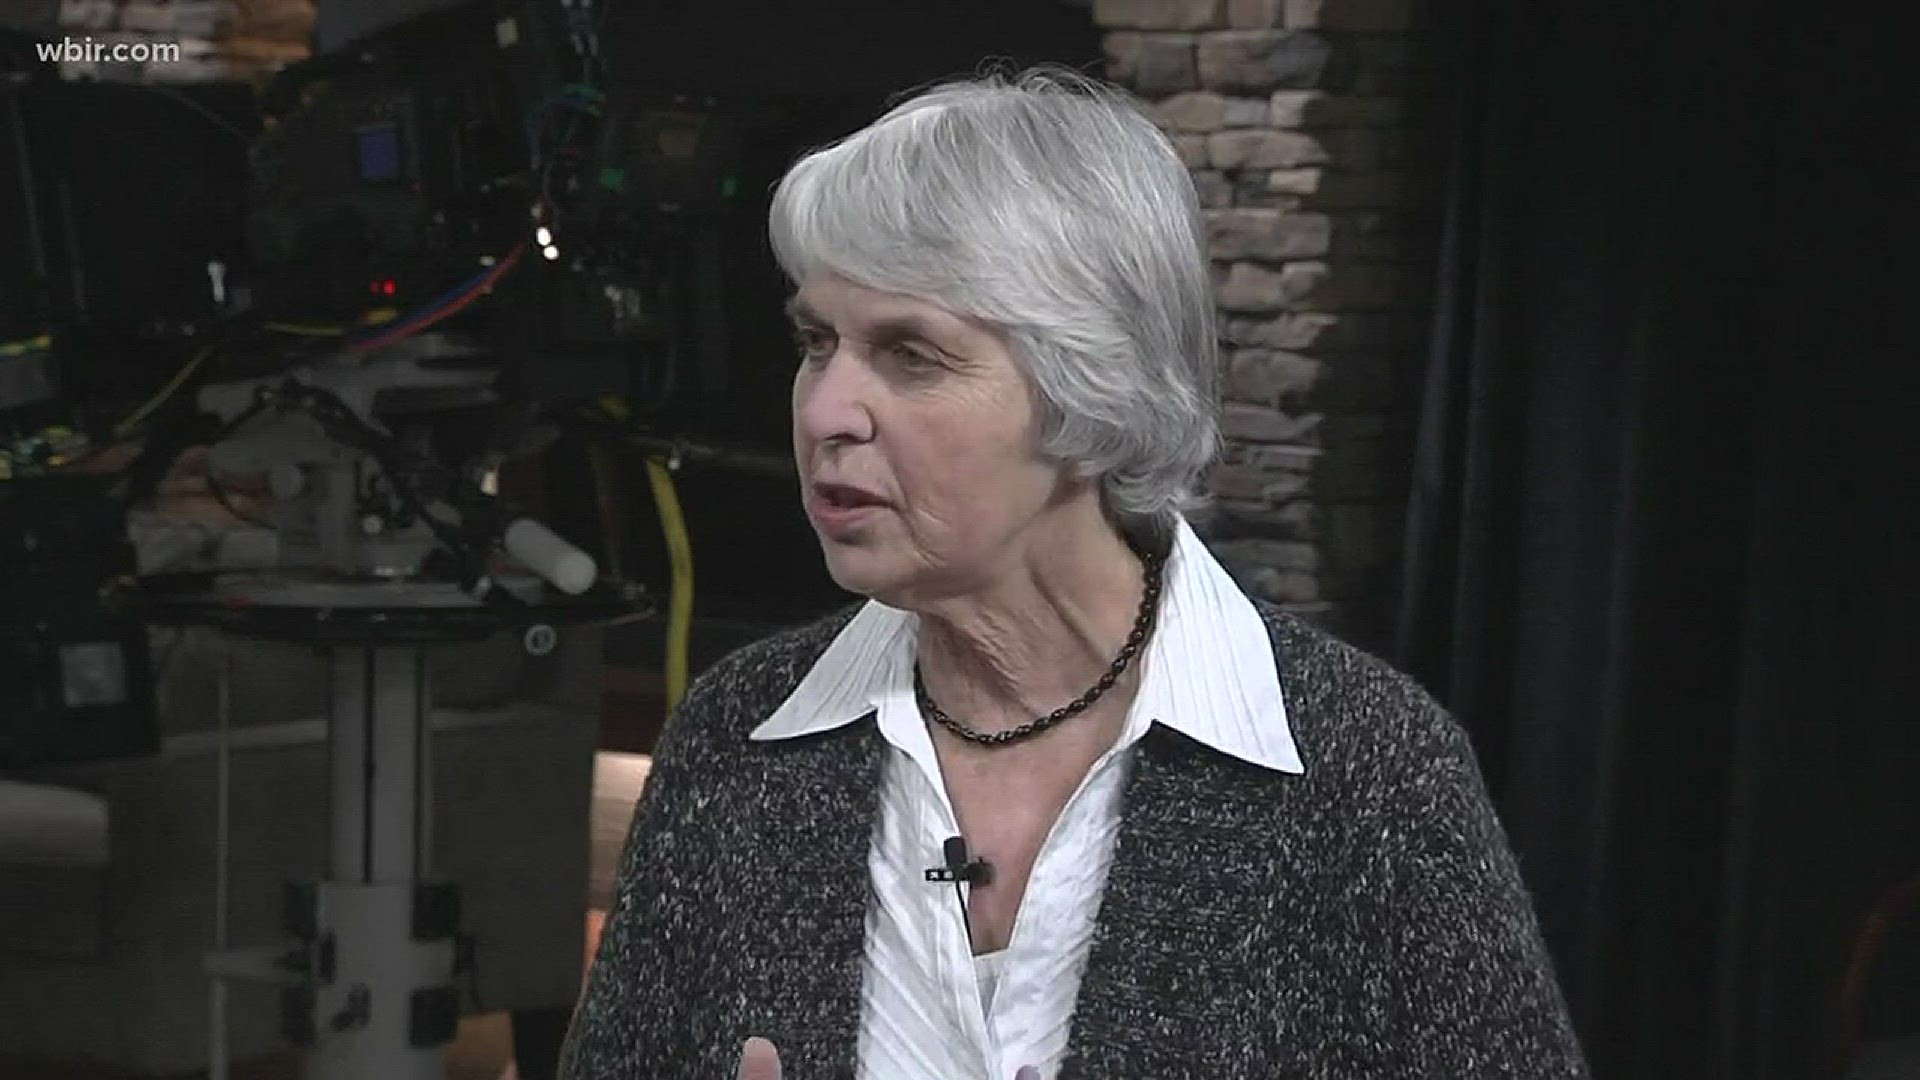 March 7, 2018: Knox County mayoral candidate Linda Haney discusses debt service and taxes.